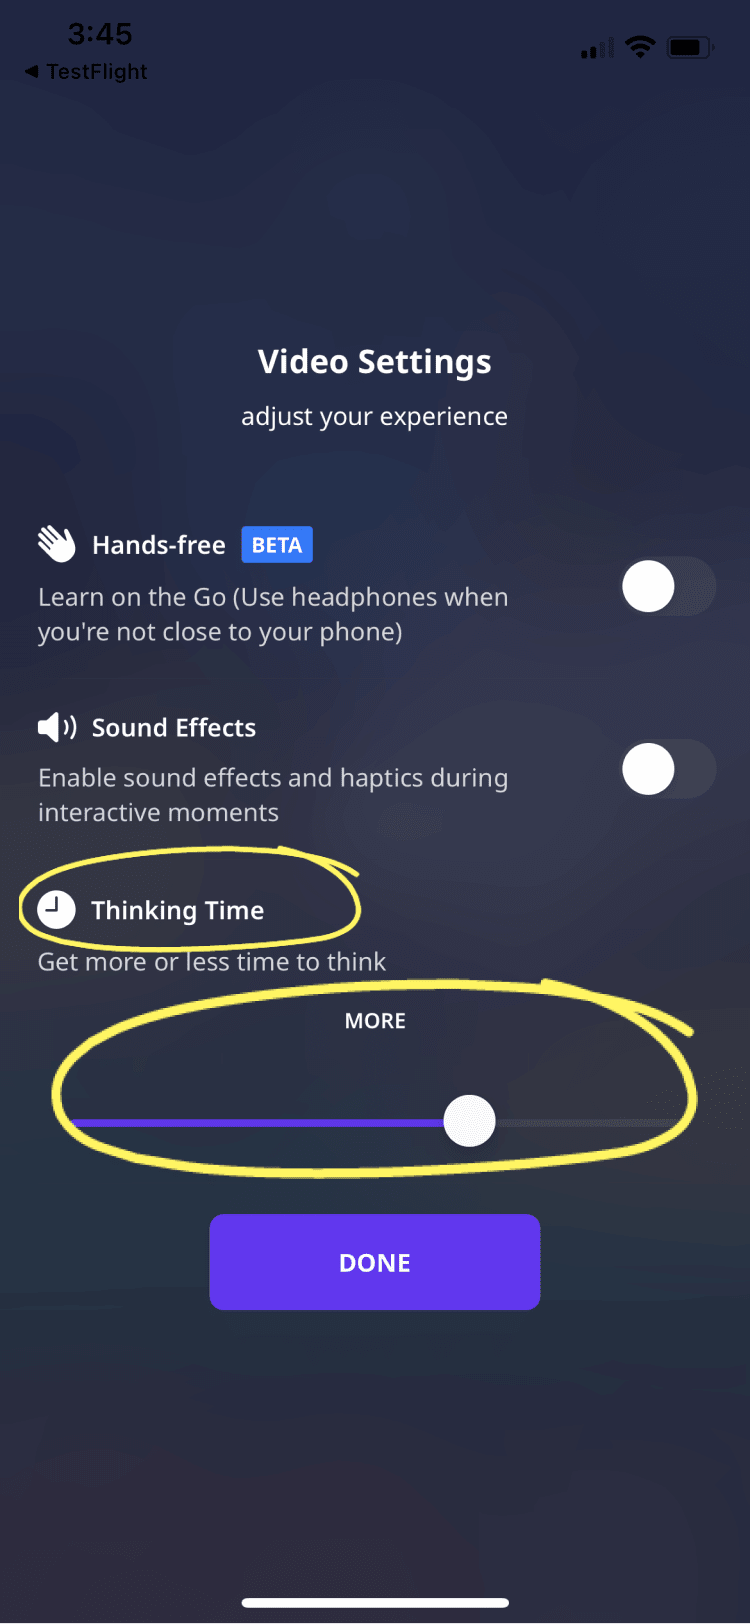 Kleo app Video Settings with Thinking Time slider circled in yellow for demonstration.